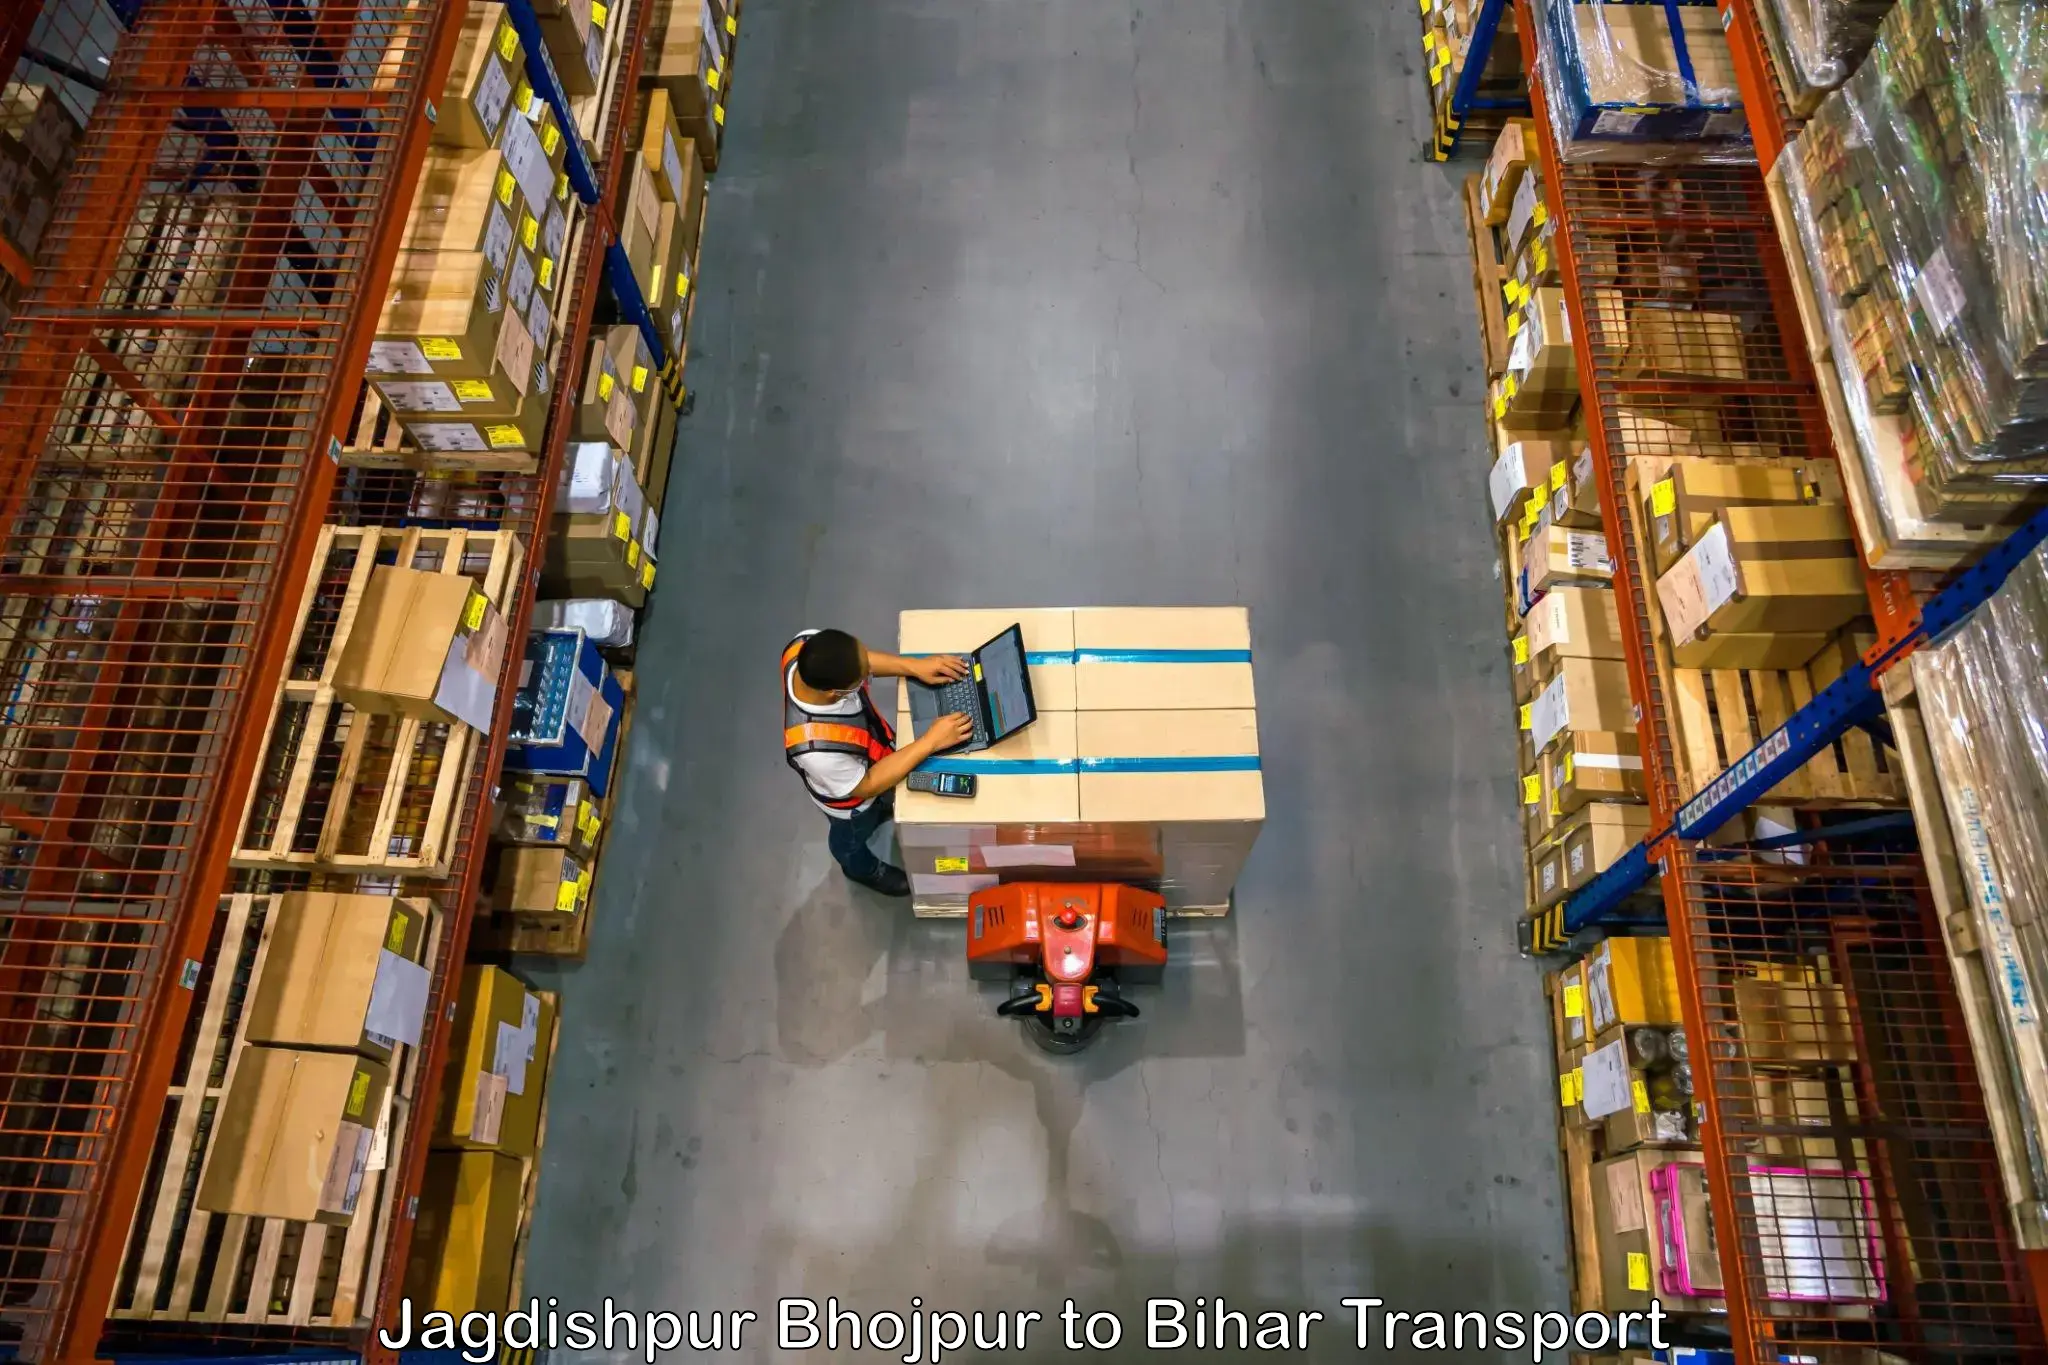 Container transport service Jagdishpur Bhojpur to Jehanabad